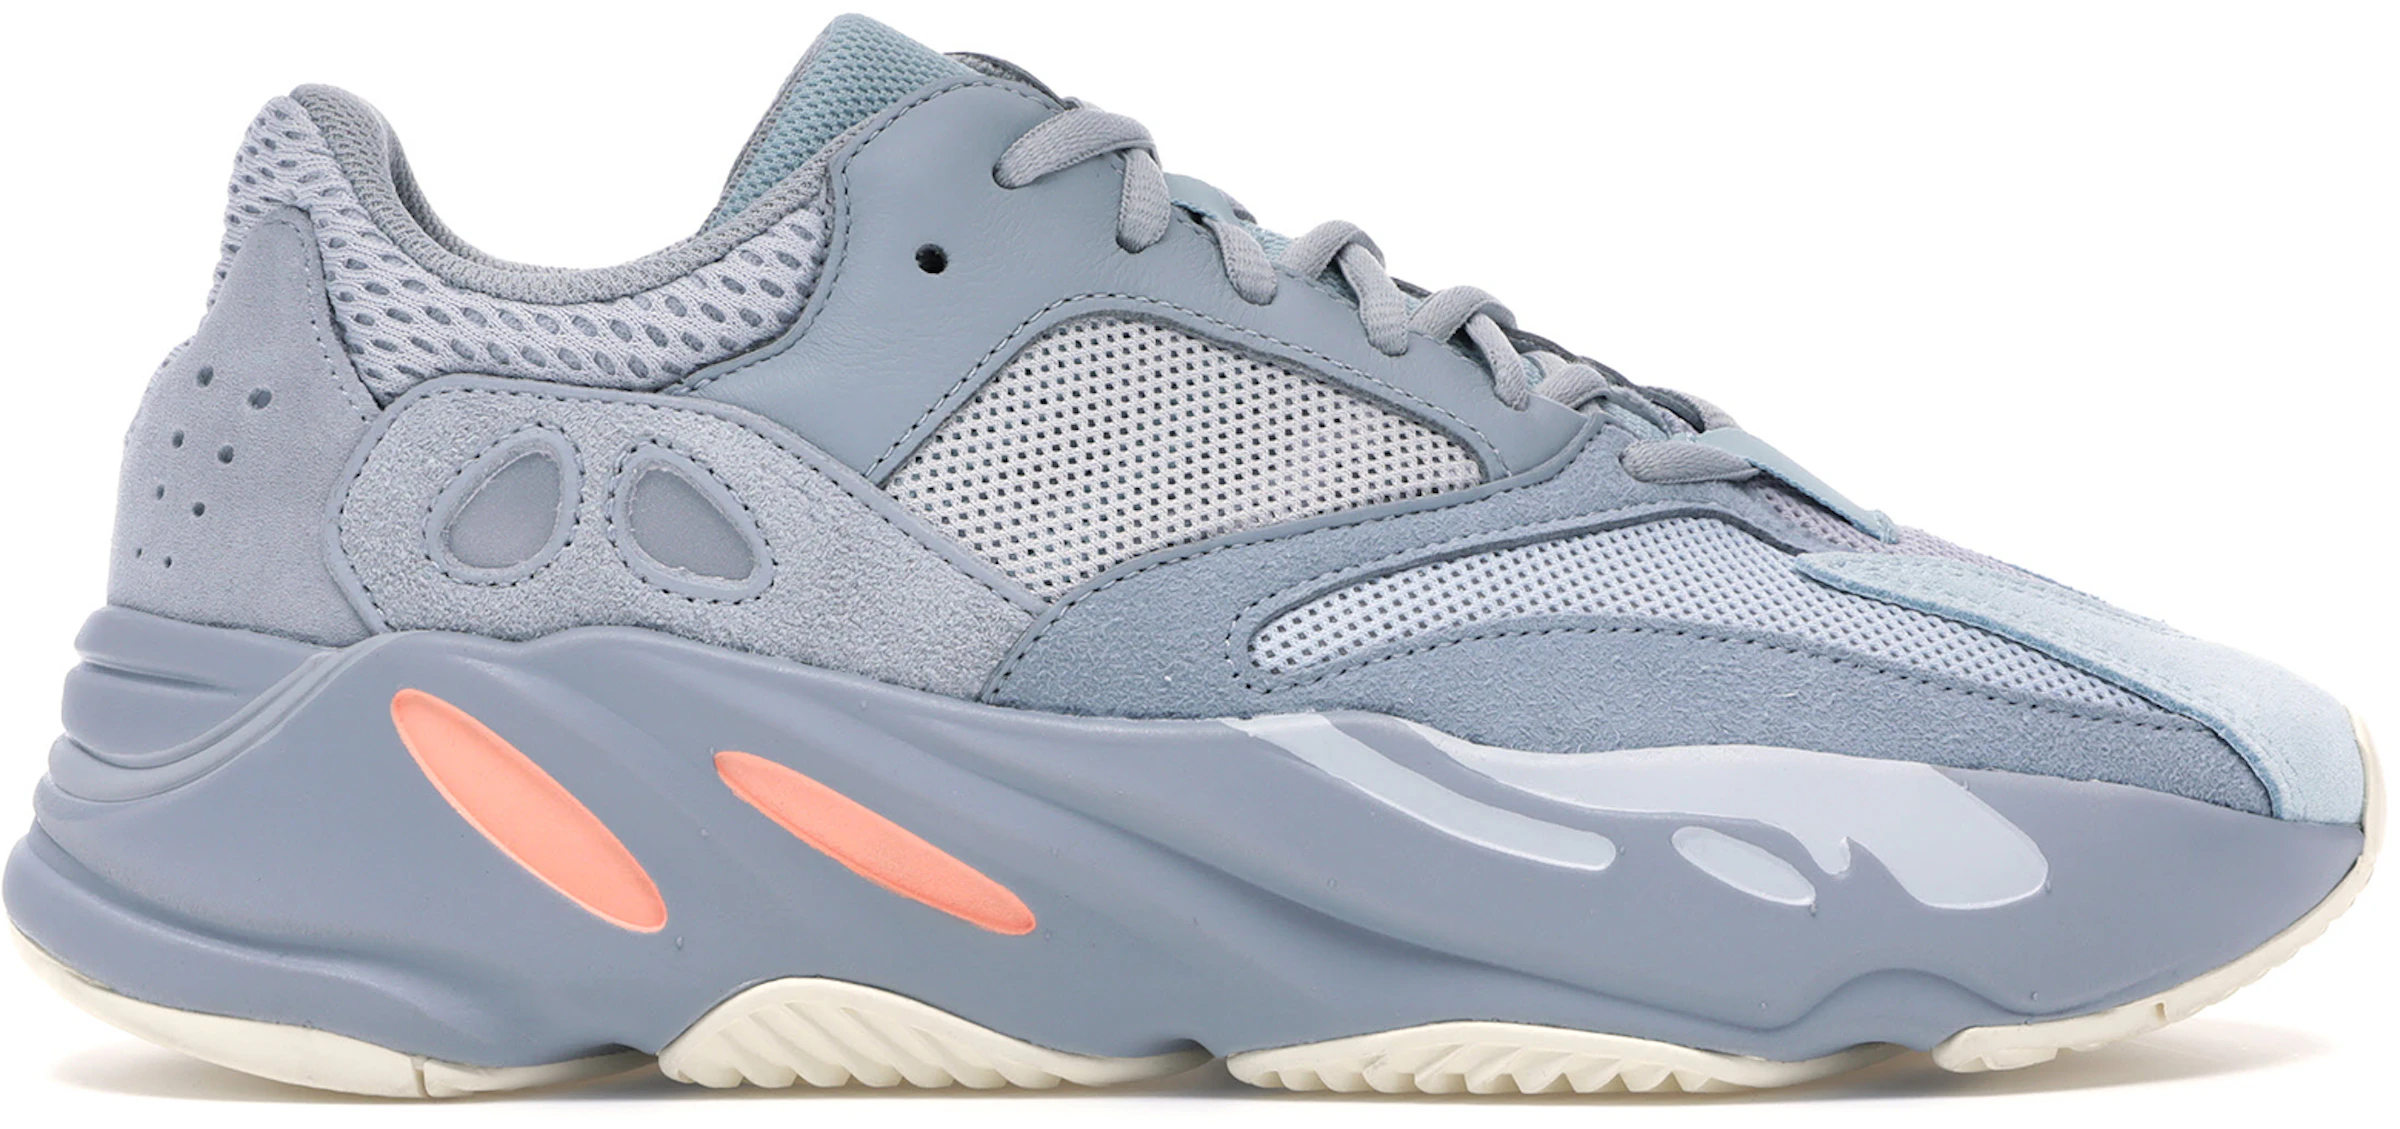 Yeezy Boost 700 'Wave Runner' Adidas B75571 Solid Grey/chalk White/core ...